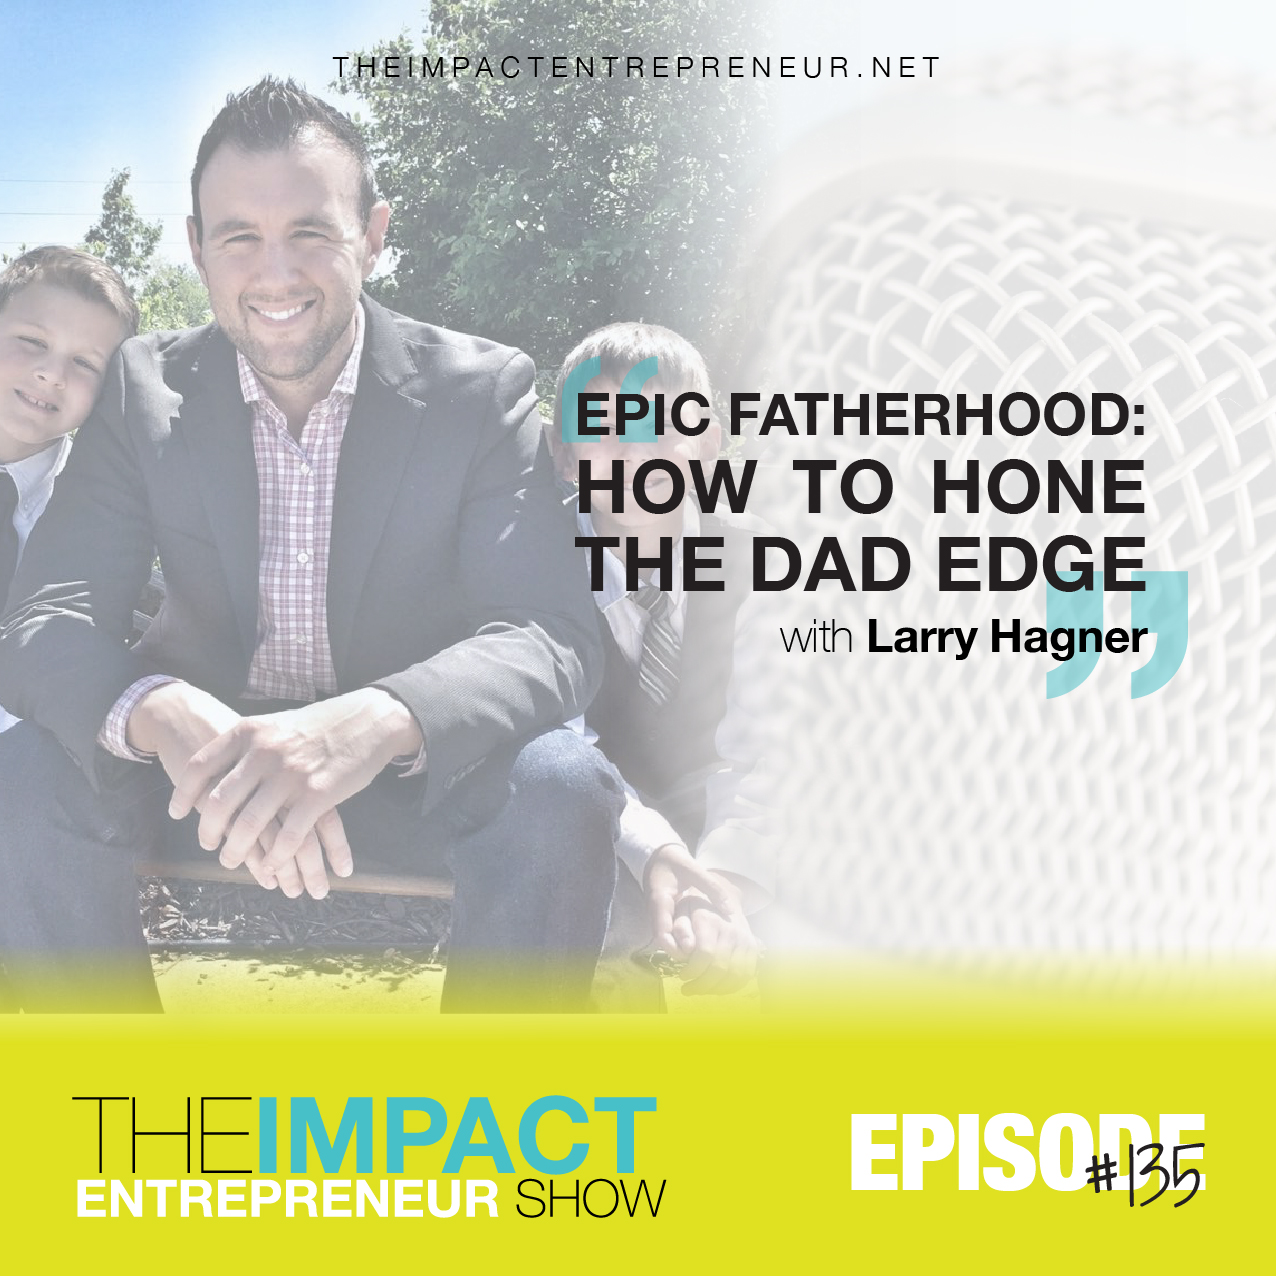 Ep. 135 - Epic Fatherhood: How to Hone The Dad Edge - with Larry Hagner